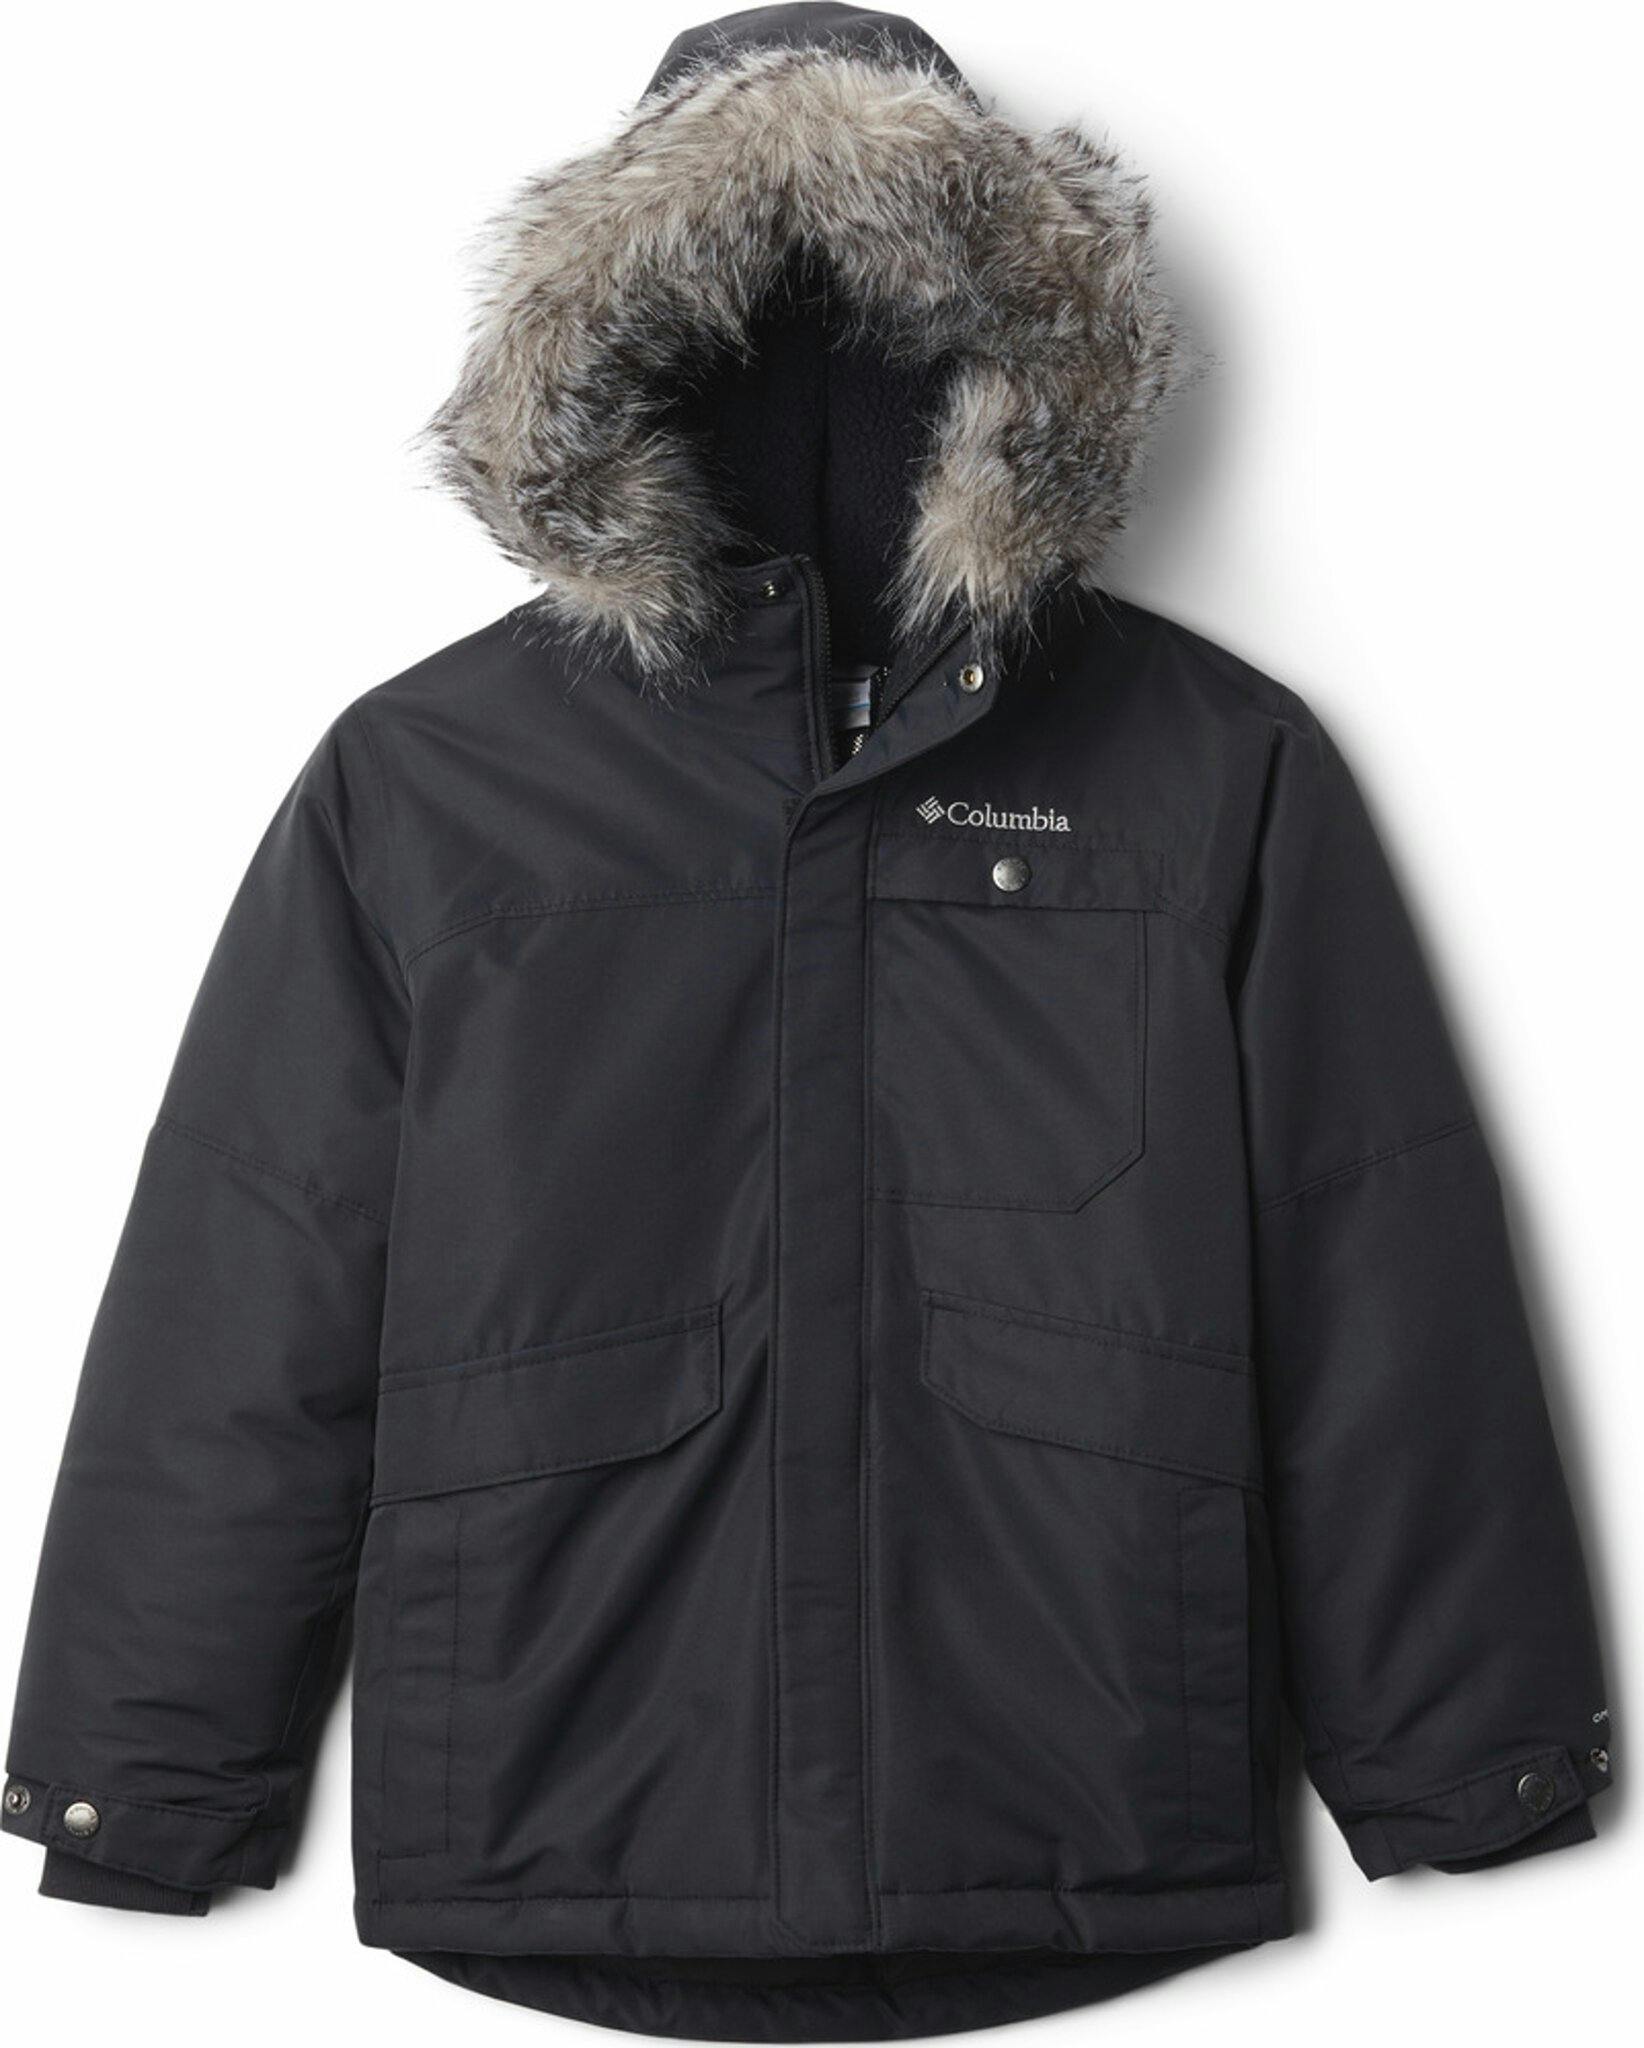 Product image for Nordic Strider Jacket - Boy's